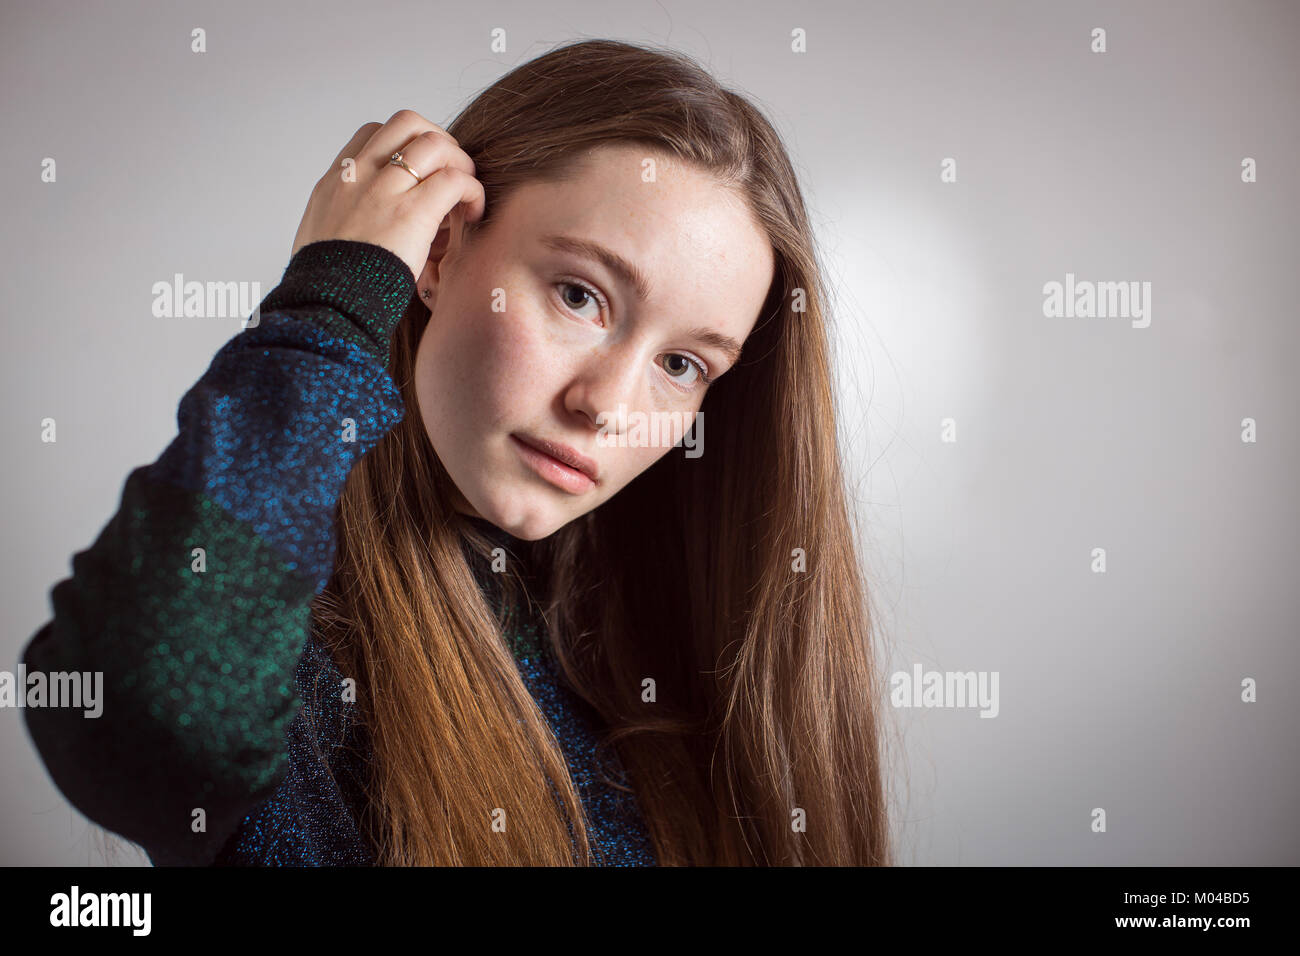 Norway, Oslo - December 10, 2017. The Norwegian singer and songwriter Sigrid Raabe is best known as just Sigrid and here portrayed in Oslo. (Photo credit: Gonzales Photo - Tord Litleskare). Stock Photo